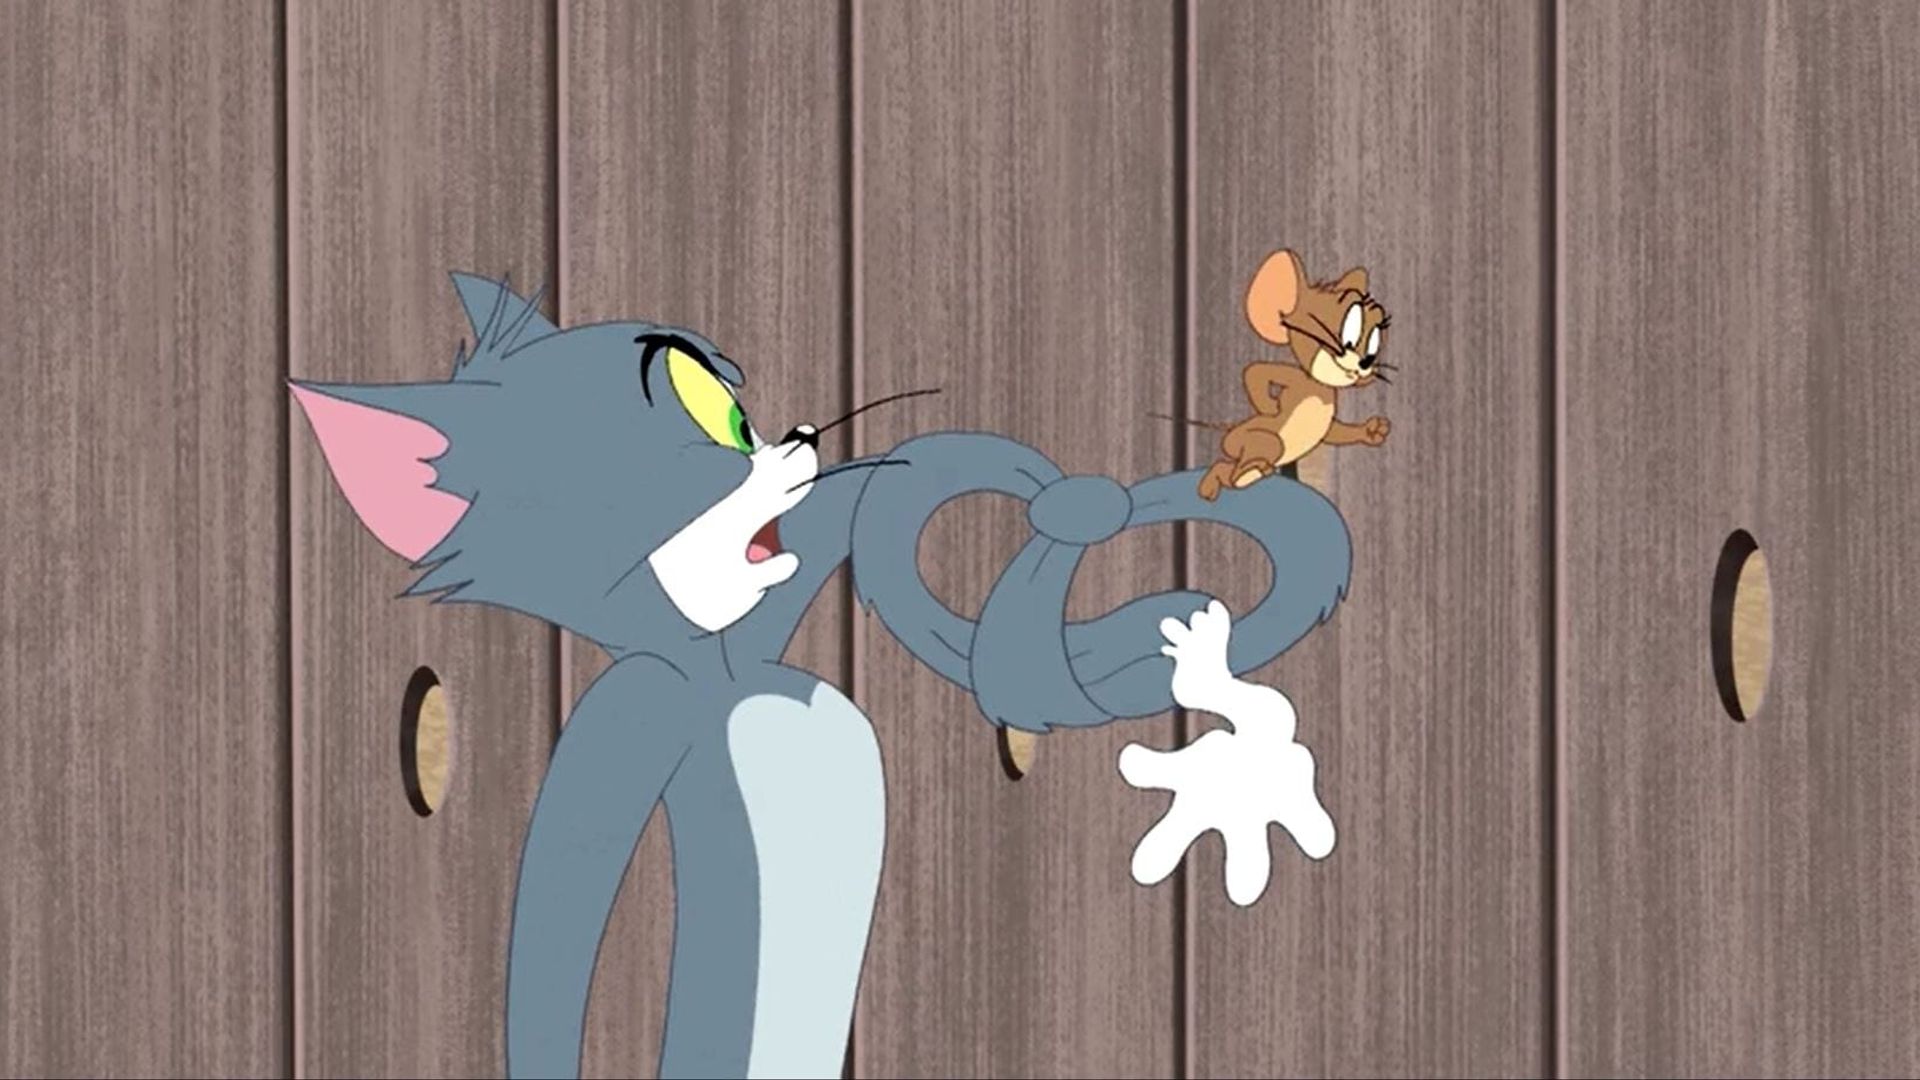 Tom and Jerry Tales background